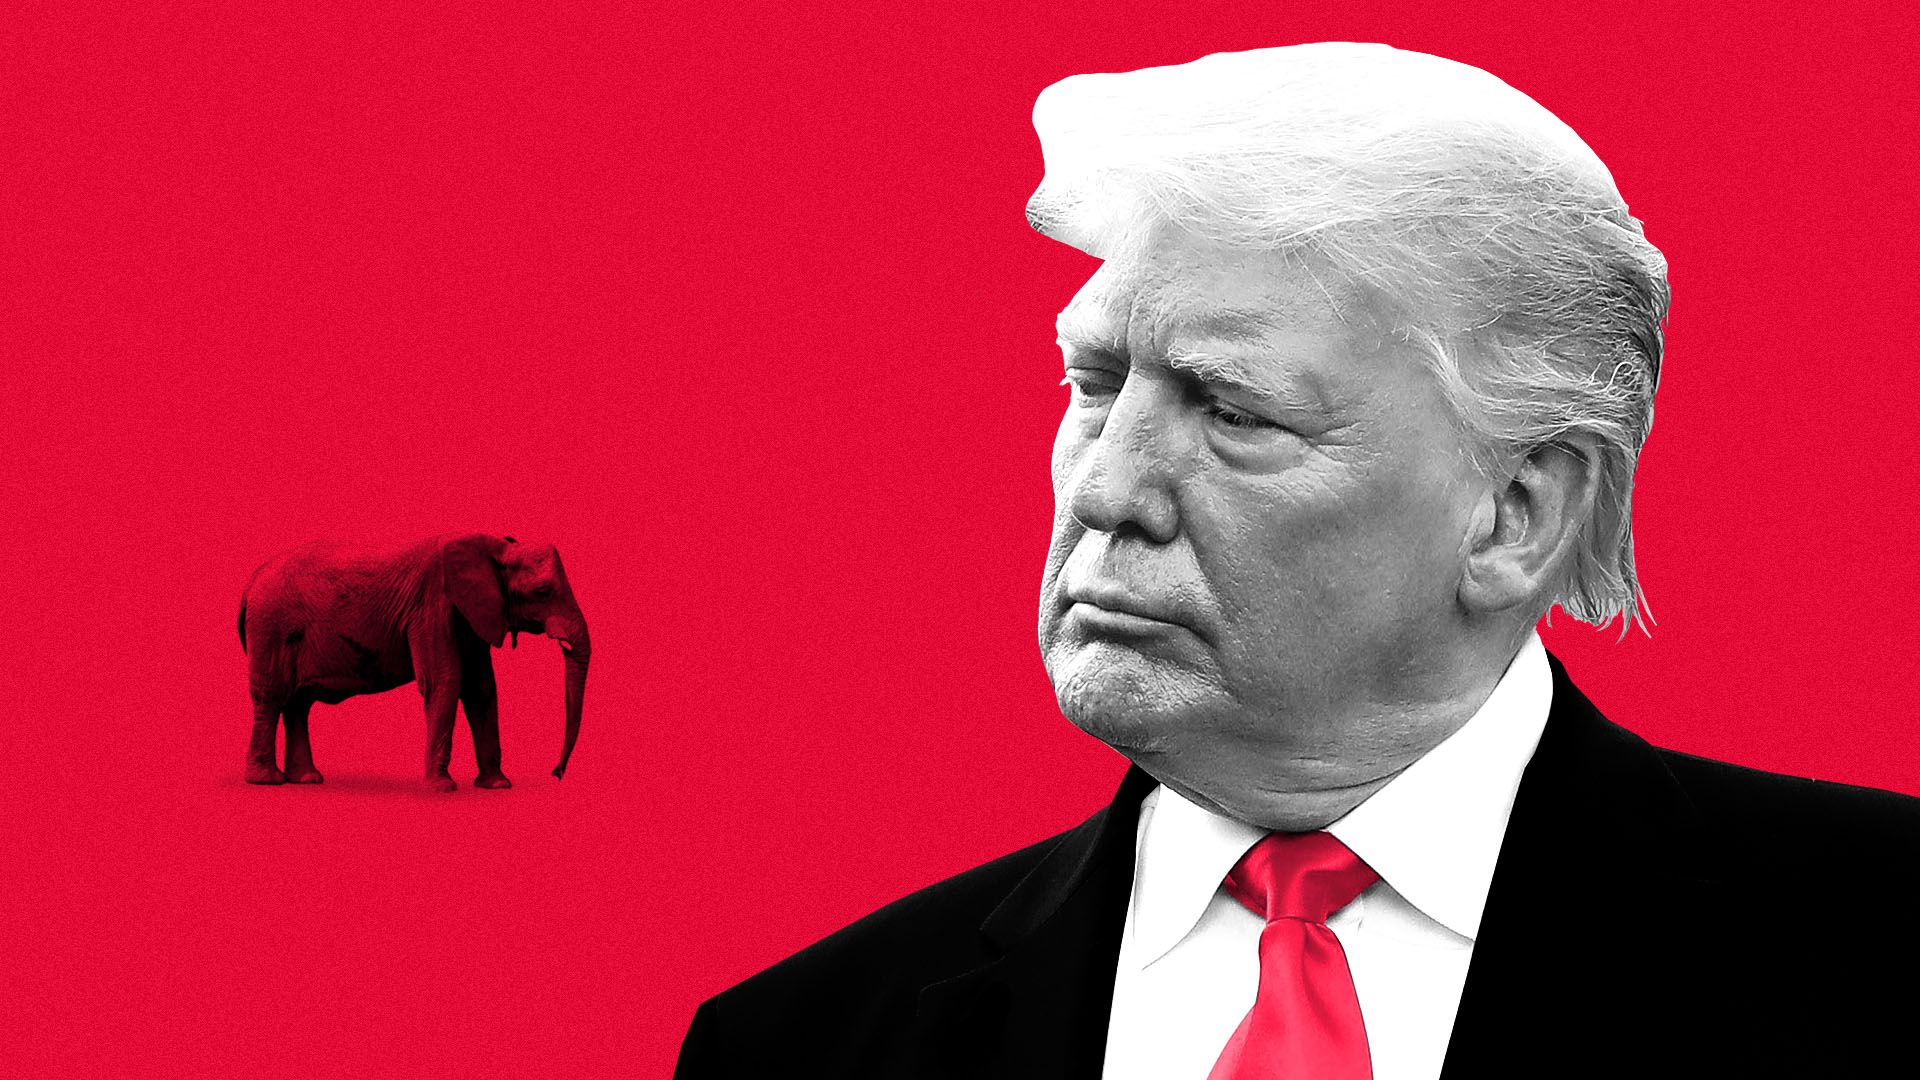 Illustration of Donald Trump staring down a small elephant.